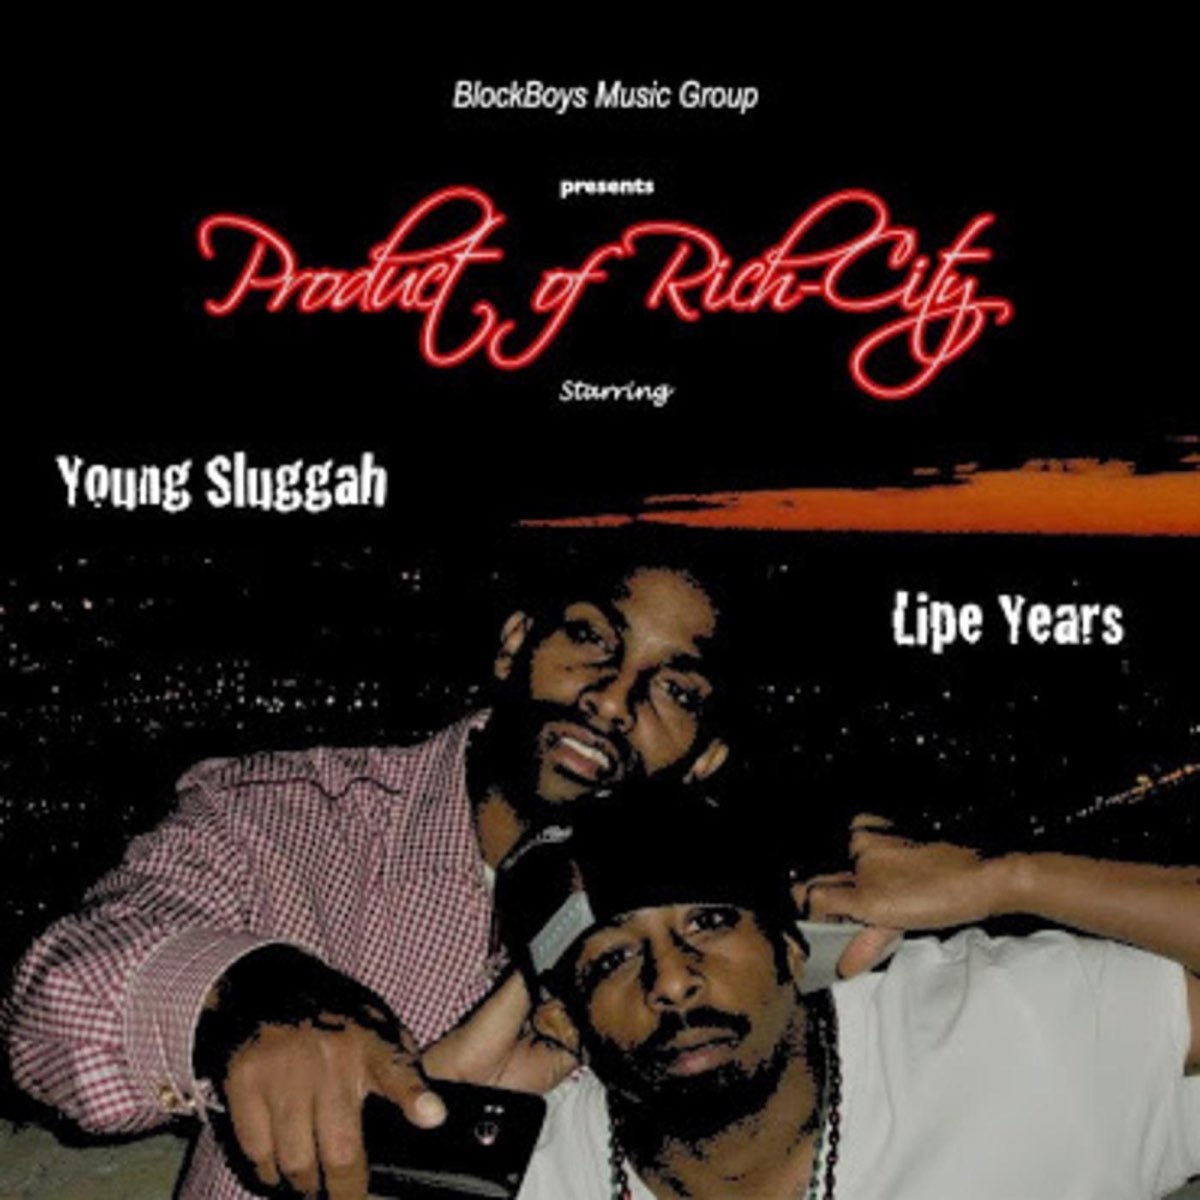 Young Sluggah & Lipe Years - Product Of Rich-City